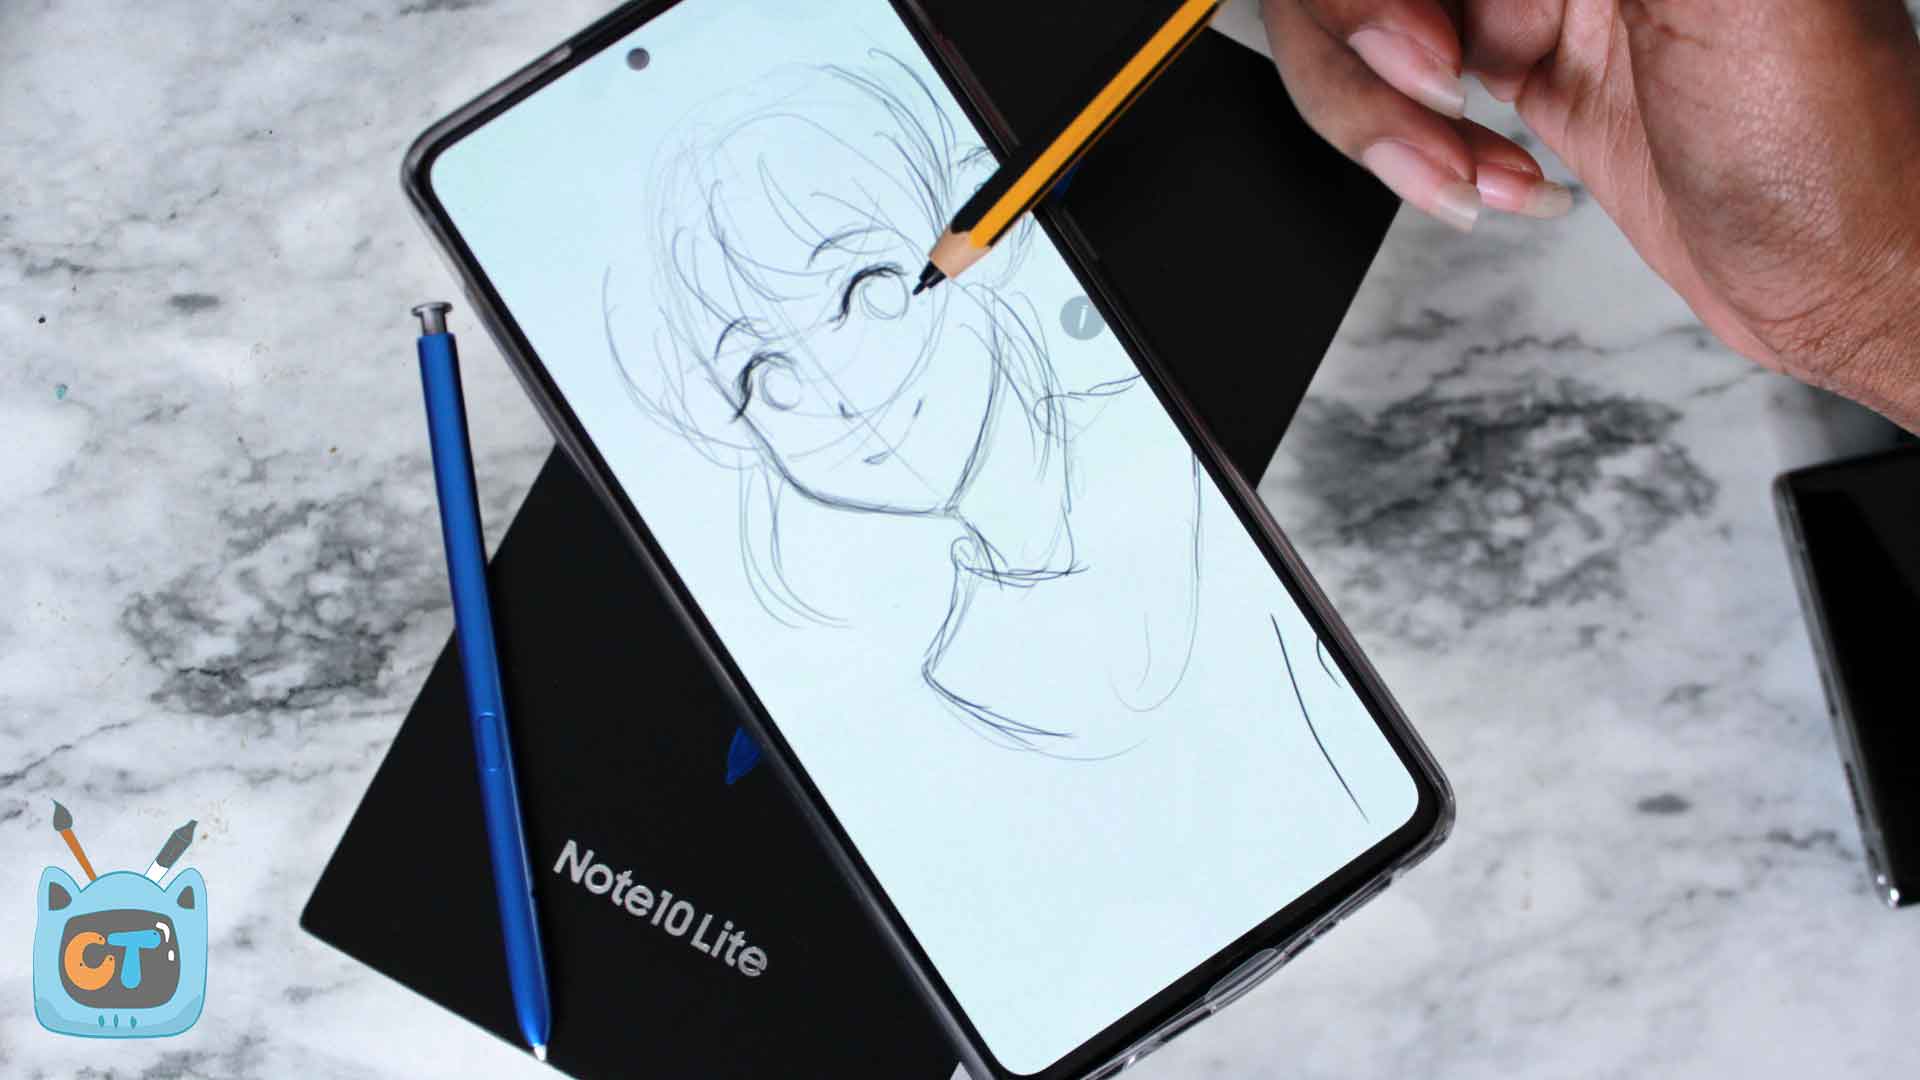 Samsung Galaxy Note 10 Lite review: Making the S Pen experience affordable